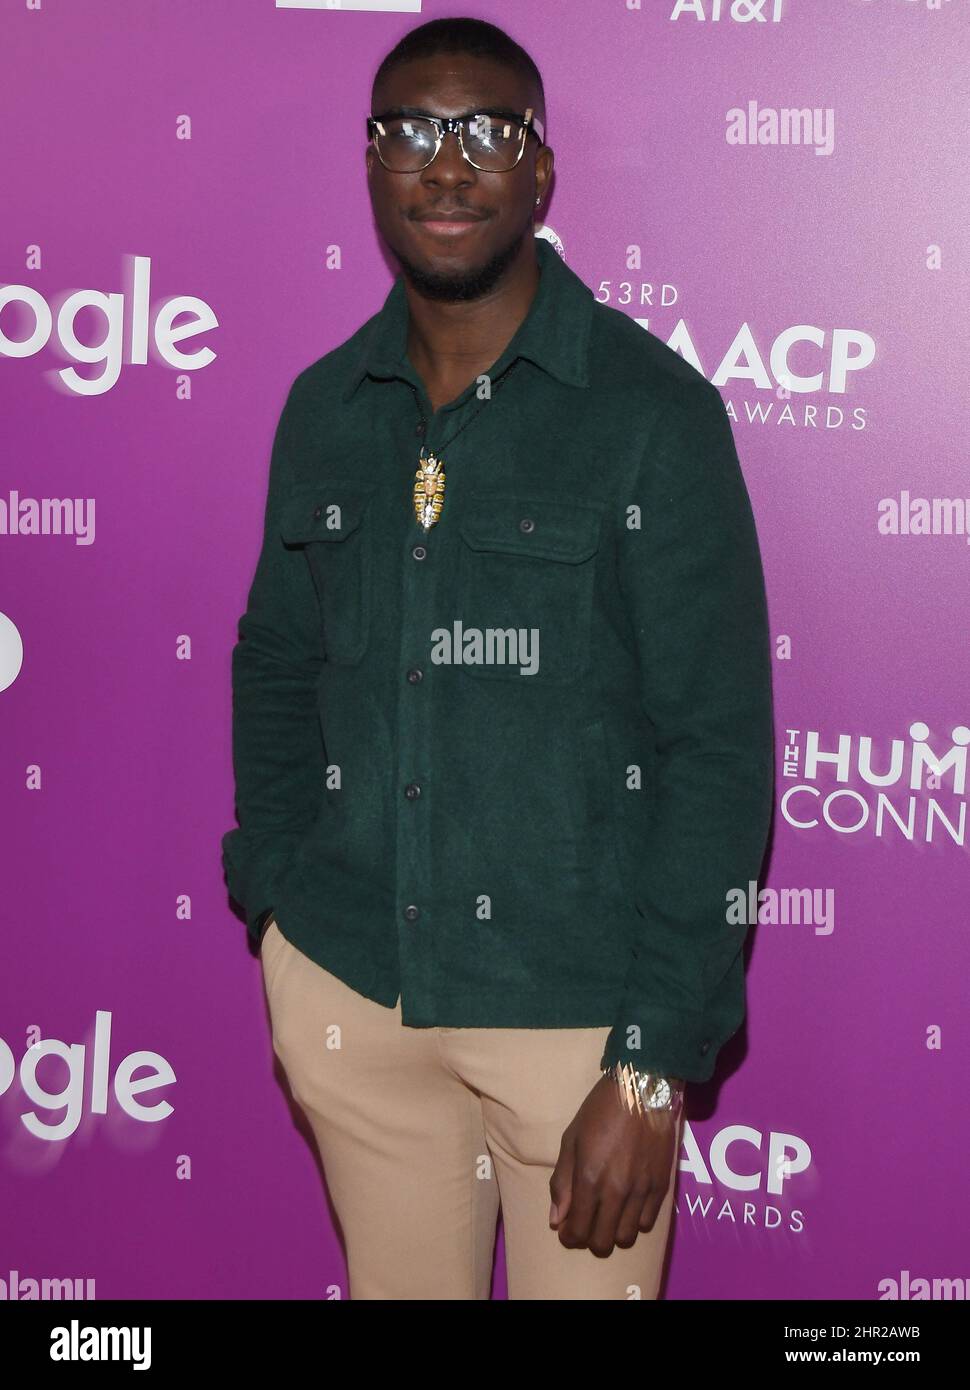 Los Angeles, USA. 24th Feb, 2022. Elisee Junior St Preux arrives at the 53rd NAACP Image Awards Nominees Reception held at the Beverly Hilton in Beverly Hills, CA on Thursday, ?February 24, 2022. (Photo By Sthanlee B. Mirador/Sipa USA) Credit: Sipa USA/Alamy Live News Stock Photo